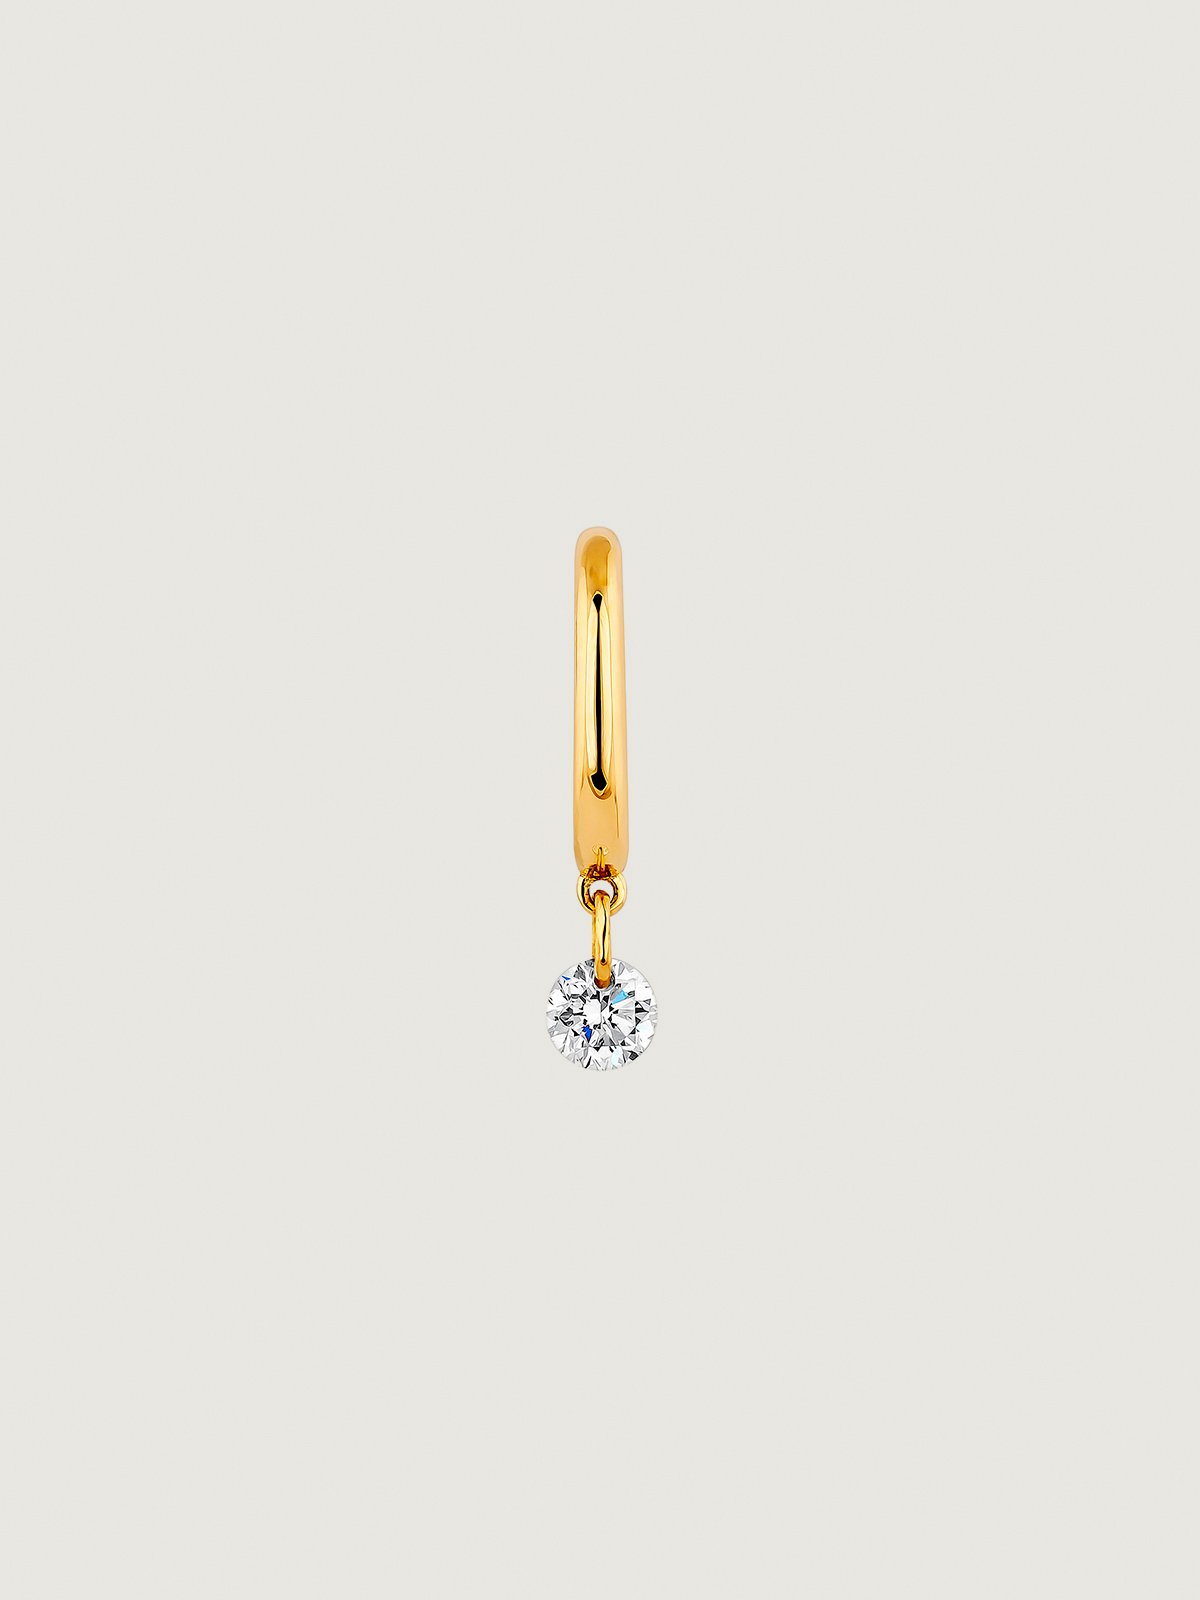 Individual small hoop earring made of 18K yellow gold with a 0.08 cts diamond.